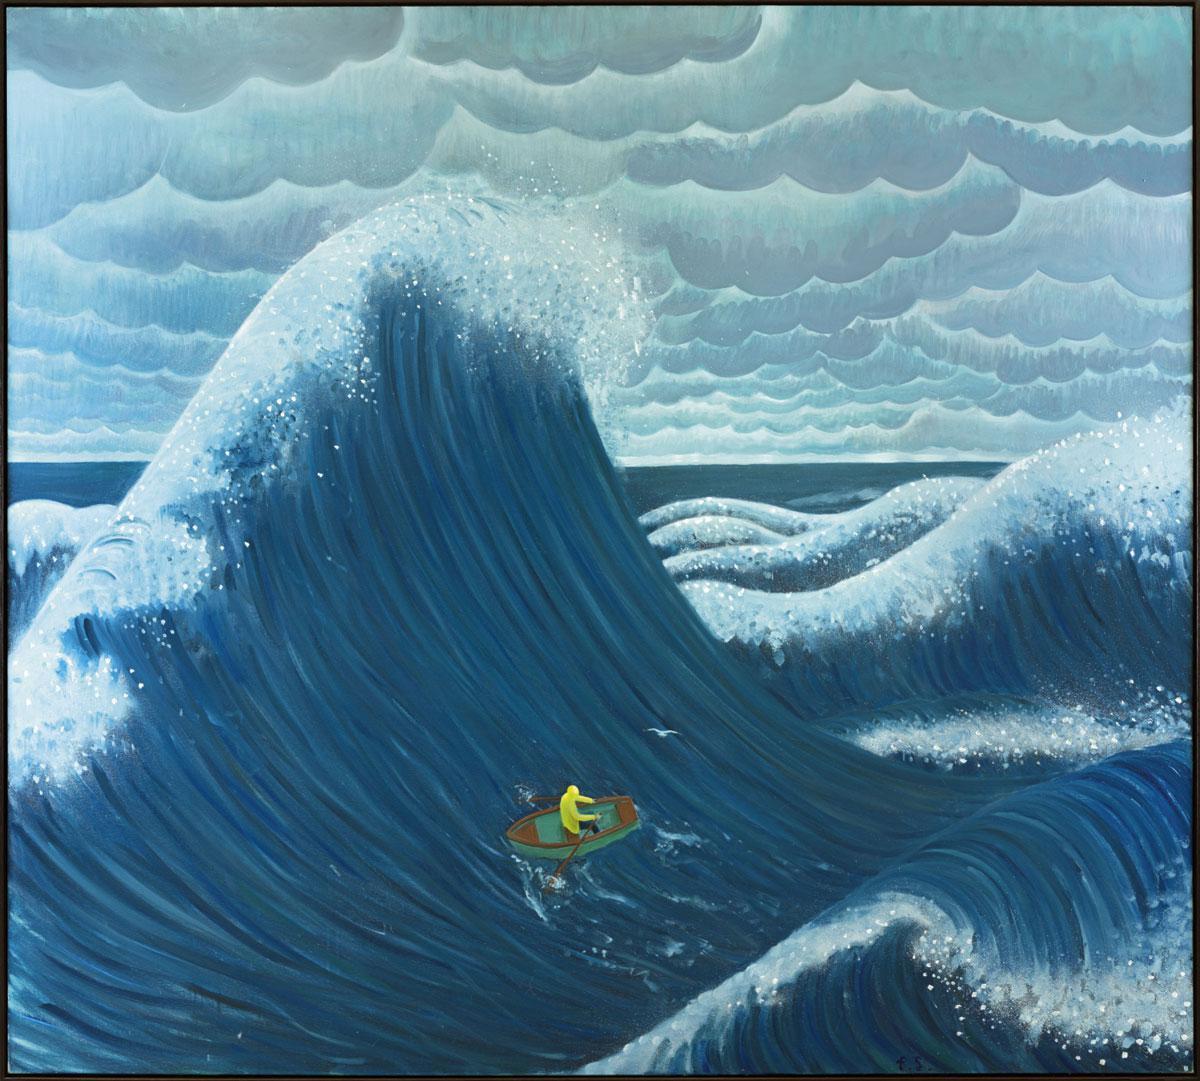 Rowing Against The Waves, Ben Sledsens, 2021.